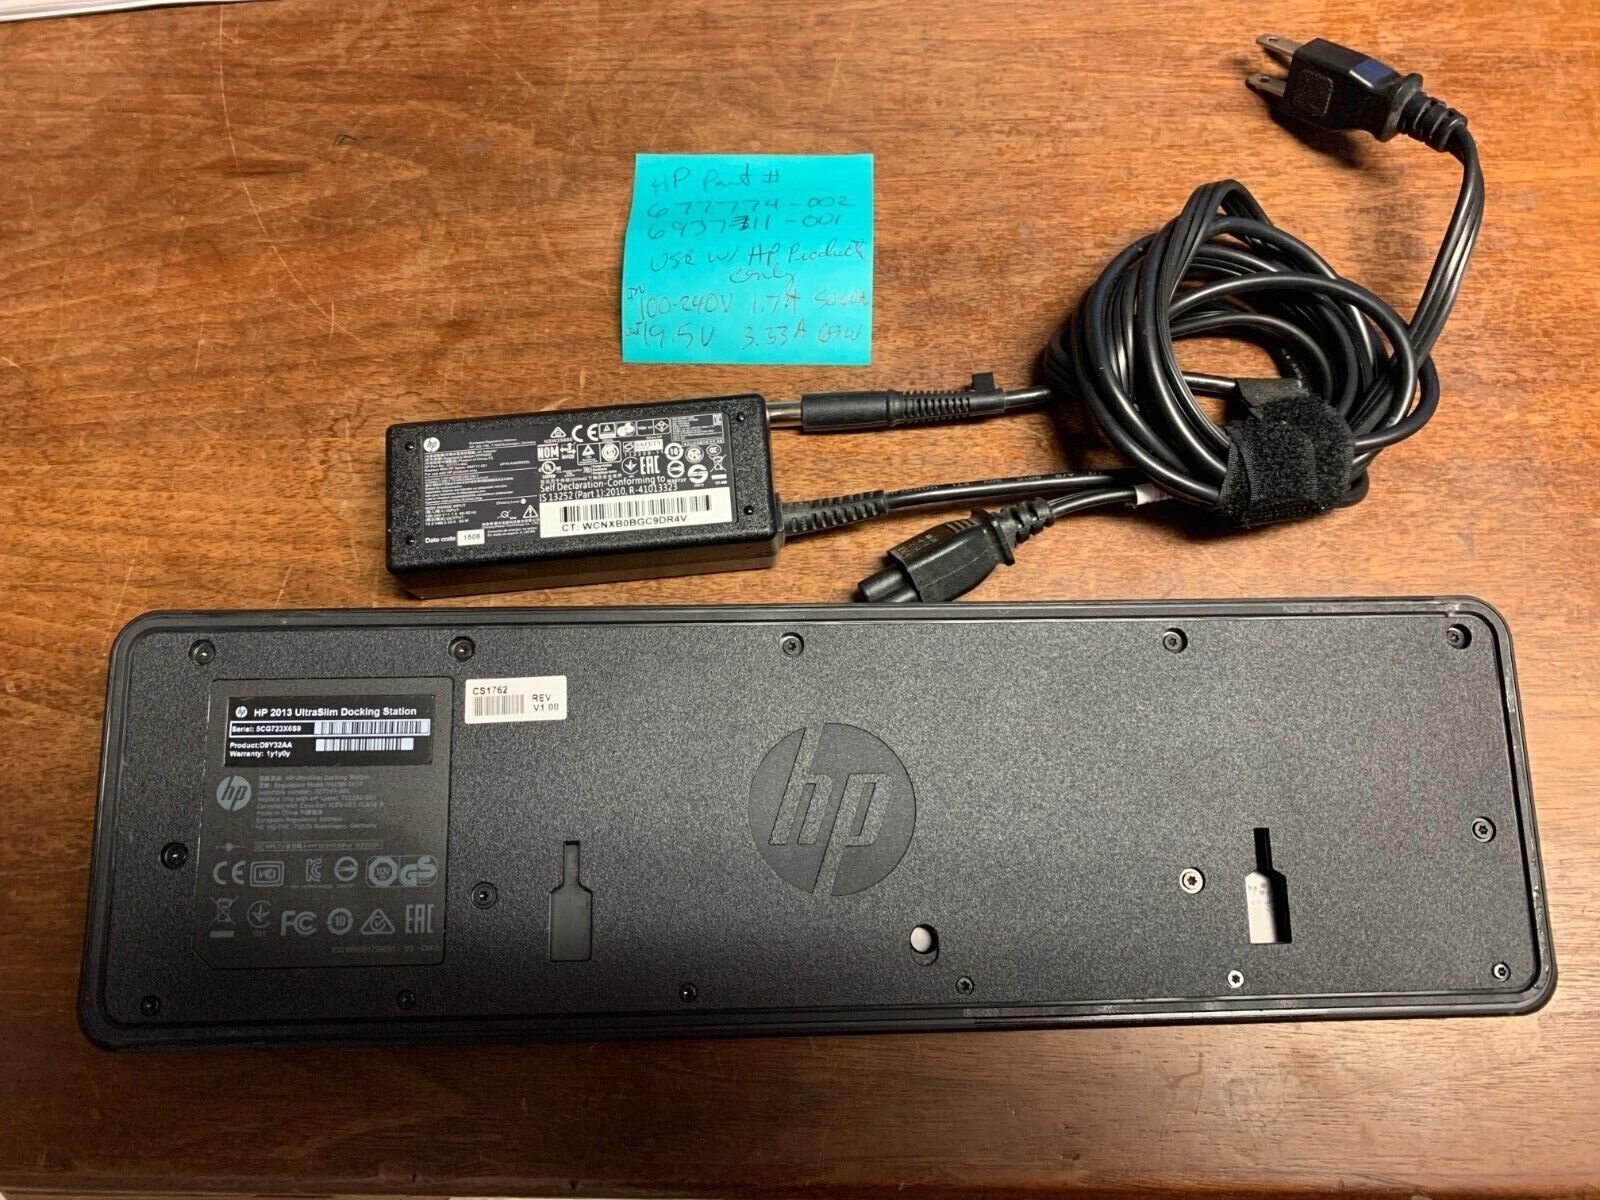 HP Power Supply PC UltraSlim Docking Station HSTNN-IX10 & D9Y32AA#ABA Cable - $15.83